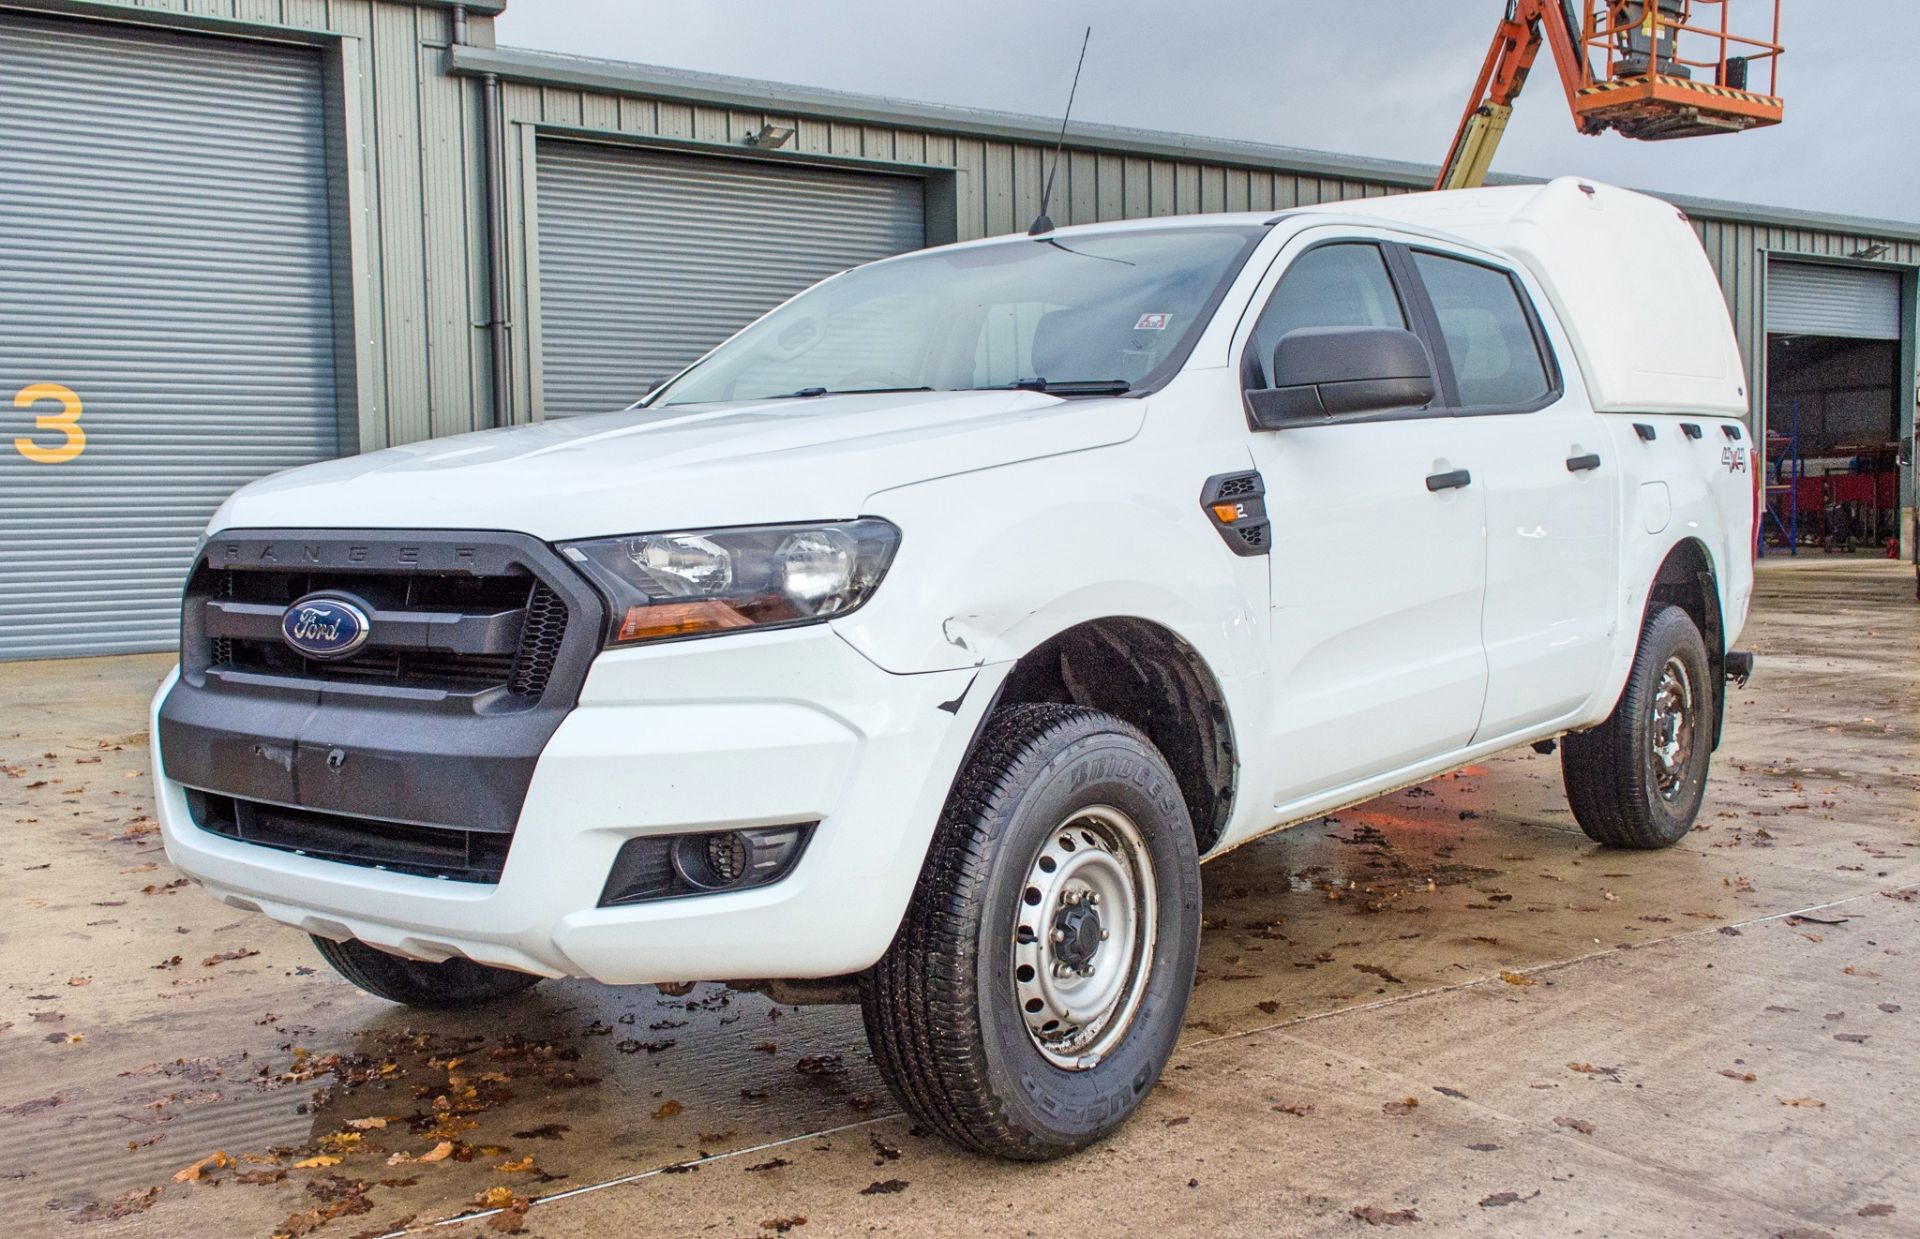 Ford Ranger 2.2 TDCi 160 XL manual 4x4 double cab pick up VIN:GL11353 Date of Registration: 16/01/